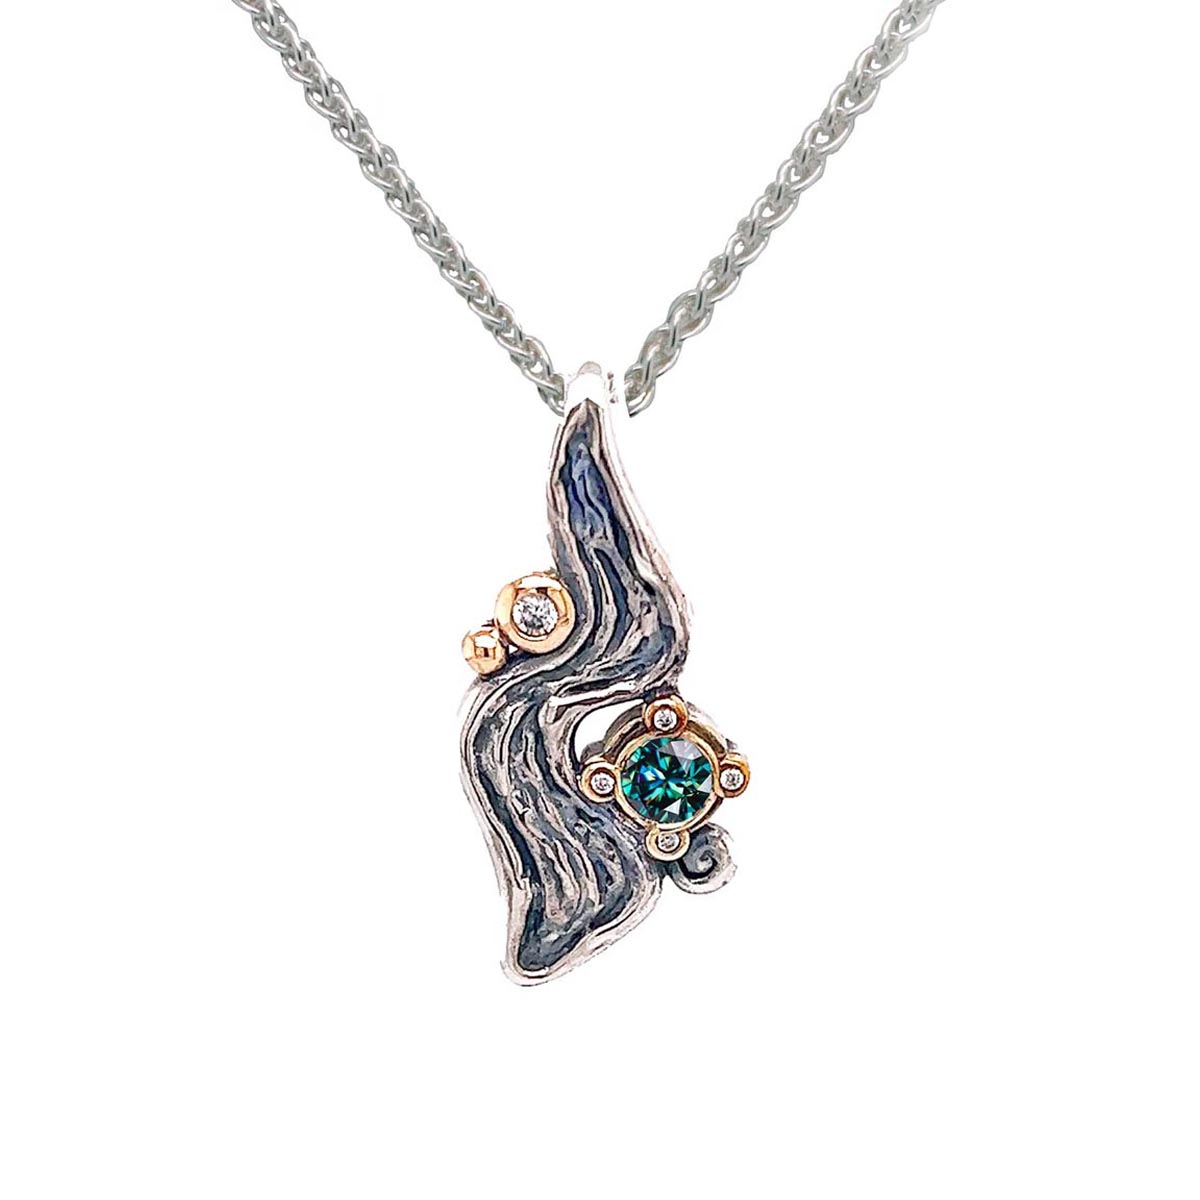 Keith Jack Rocks n Rivers Mystic Blue Moissanite Necklace in Sterling Silver and 10kt Yellow Gold with Cubic Zirconia